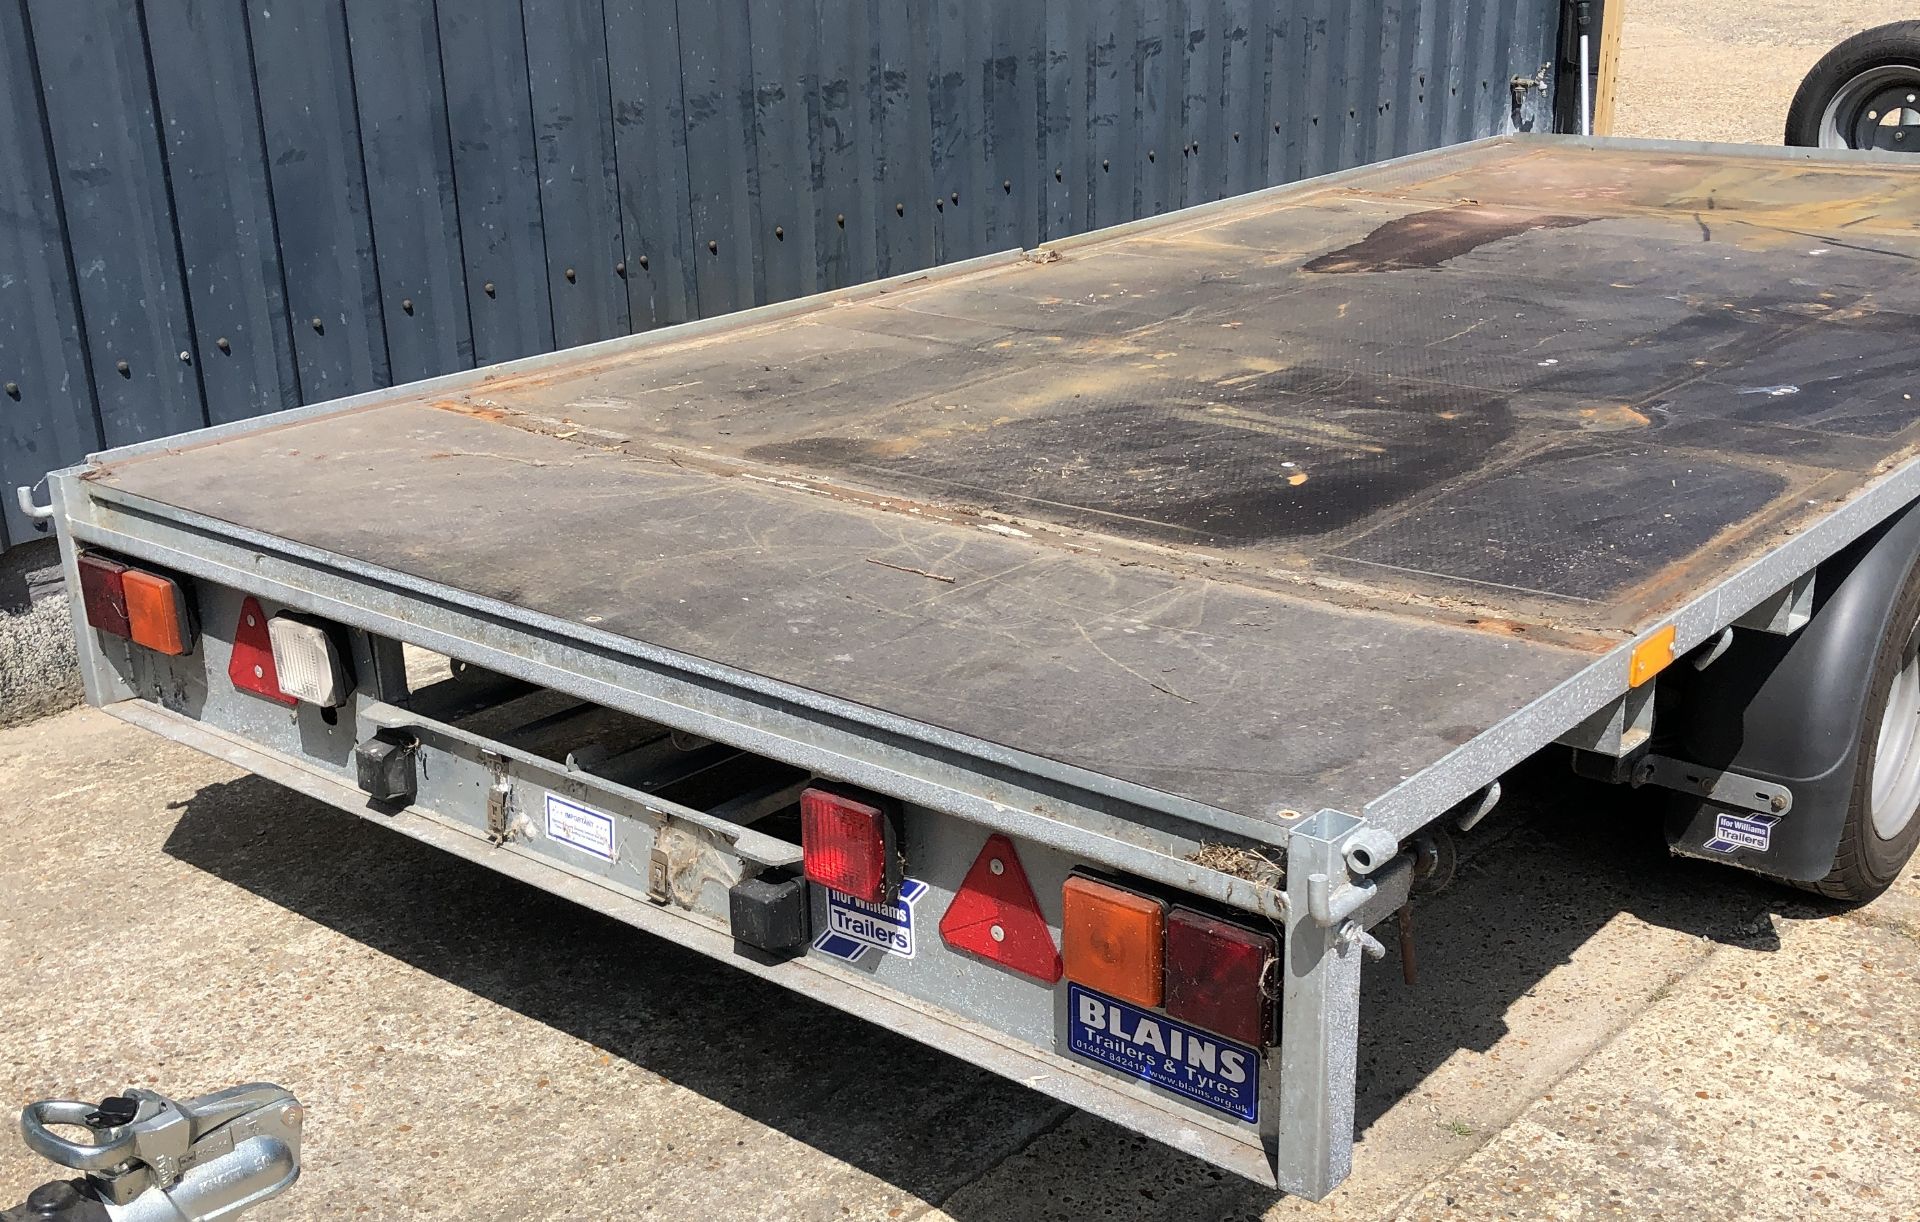 Ifor Williams Type 2CB LM146G Twin Axle Flat Trailer (2017), Serial Number 05142199, GVW 3500Kg; 14’ - Image 3 of 9